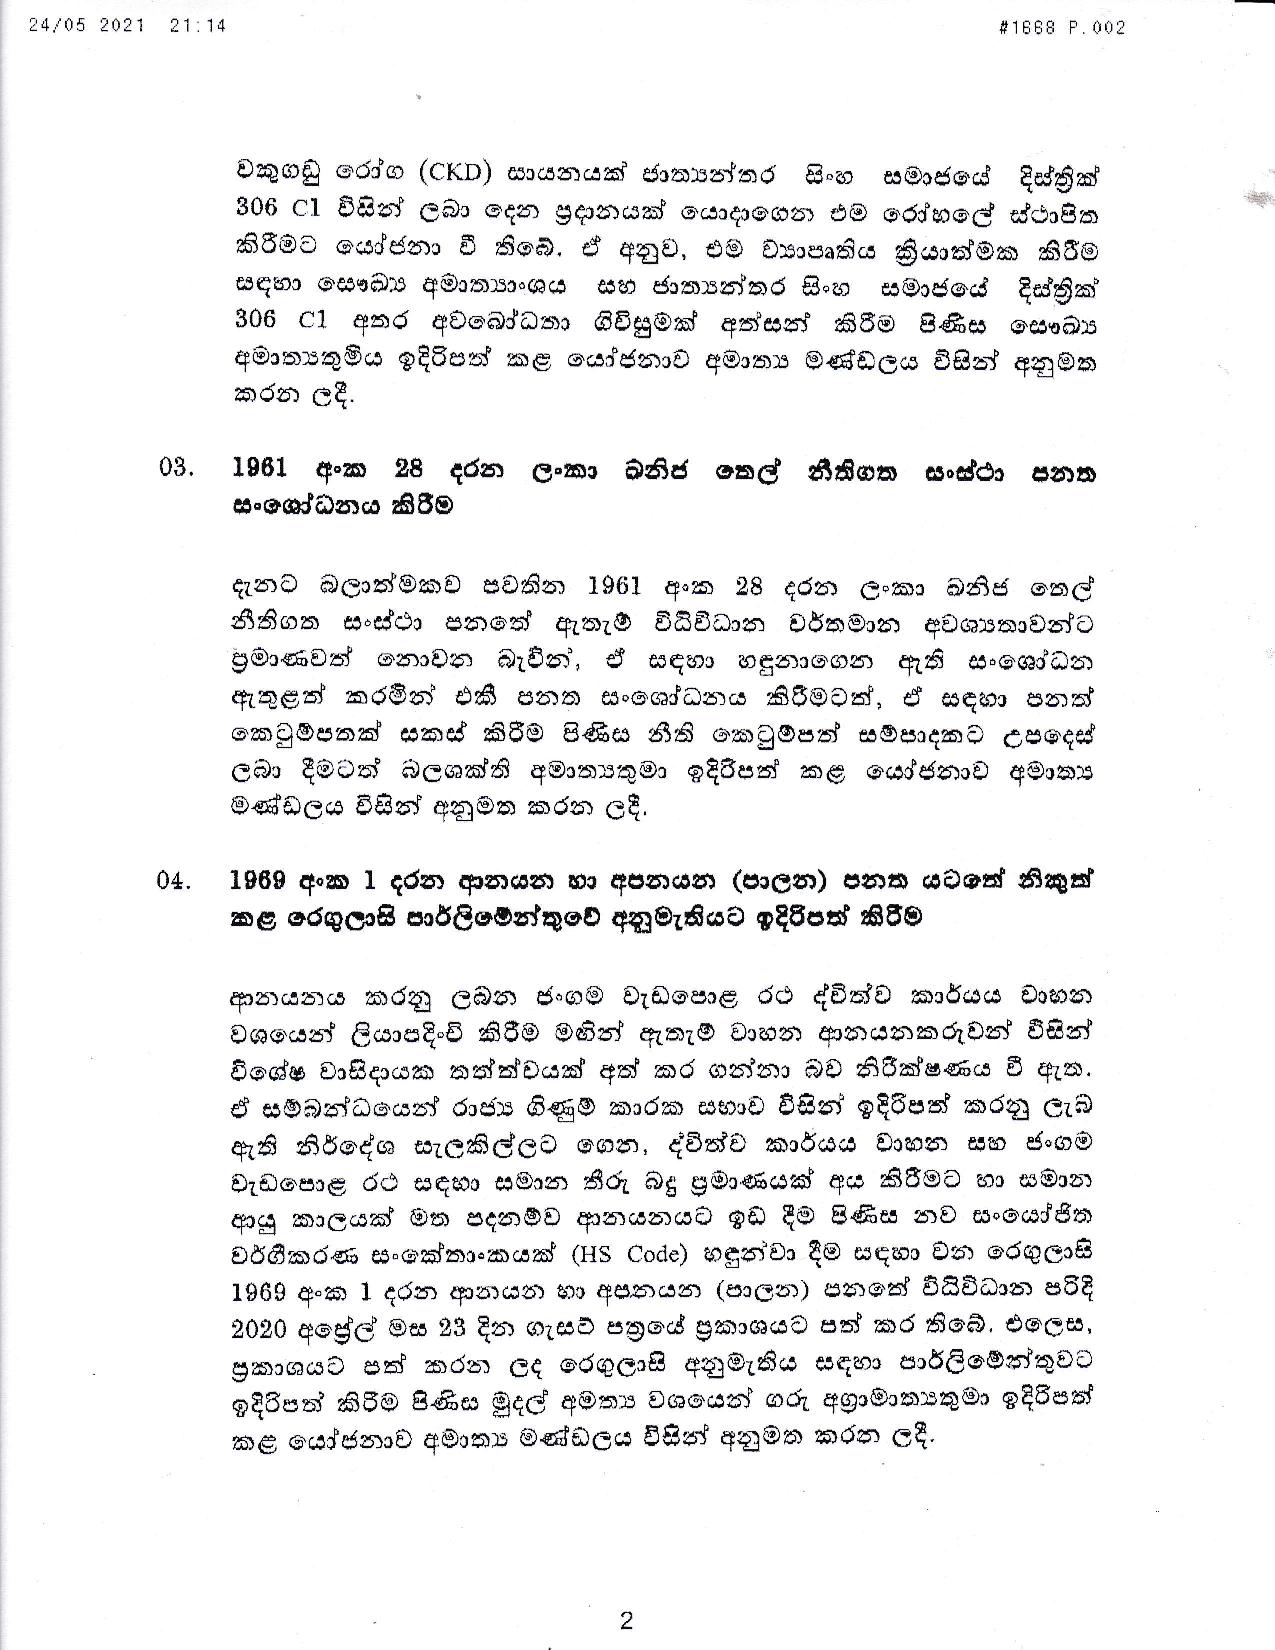 Cabinet Decisions on 24.05.2021 Sinhala page 002